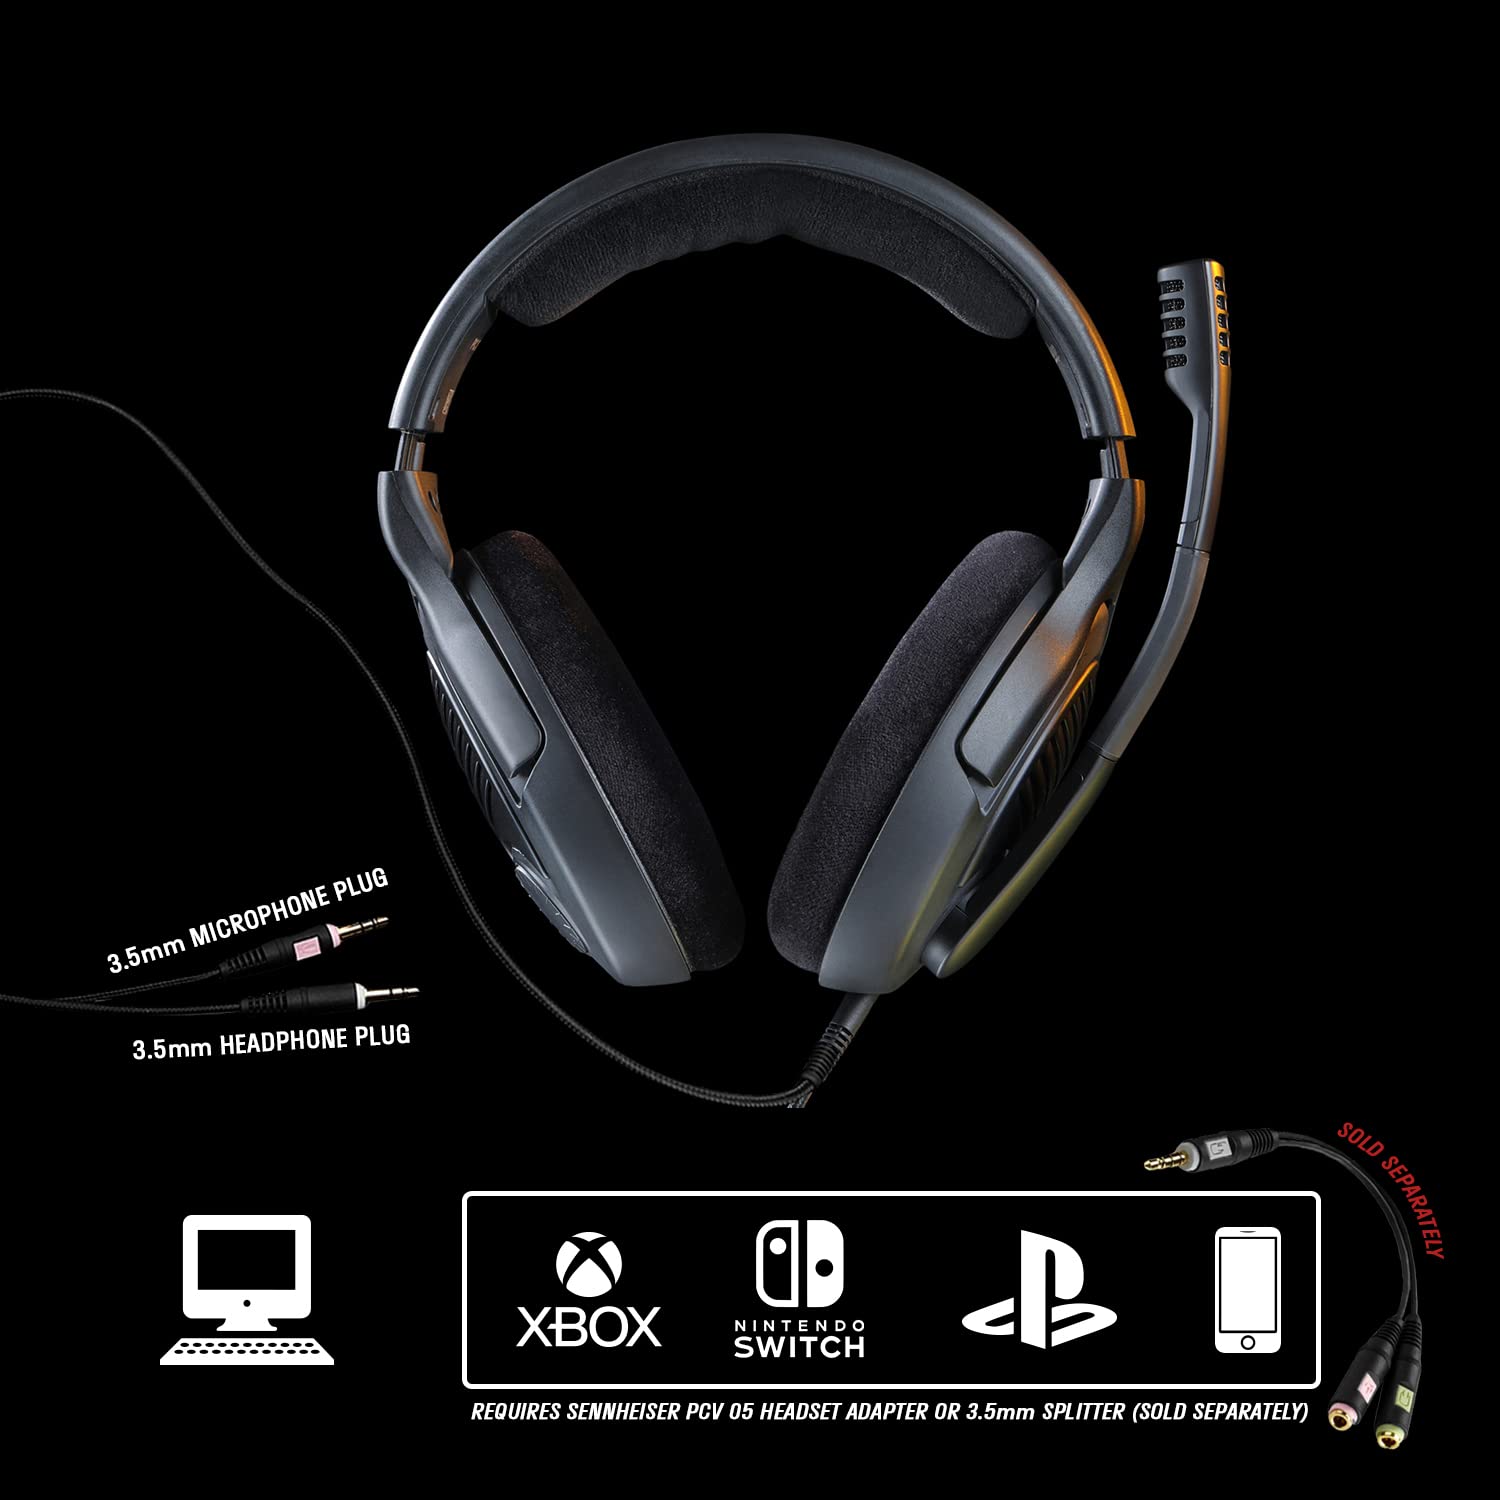 Massdrop x Sennheiser PC37X Gaming Headset — Noise-Cancelling Microphone with Over-Ear Open-Back Design, 10 ft Detachable Cable, and Velour Earpads,Black